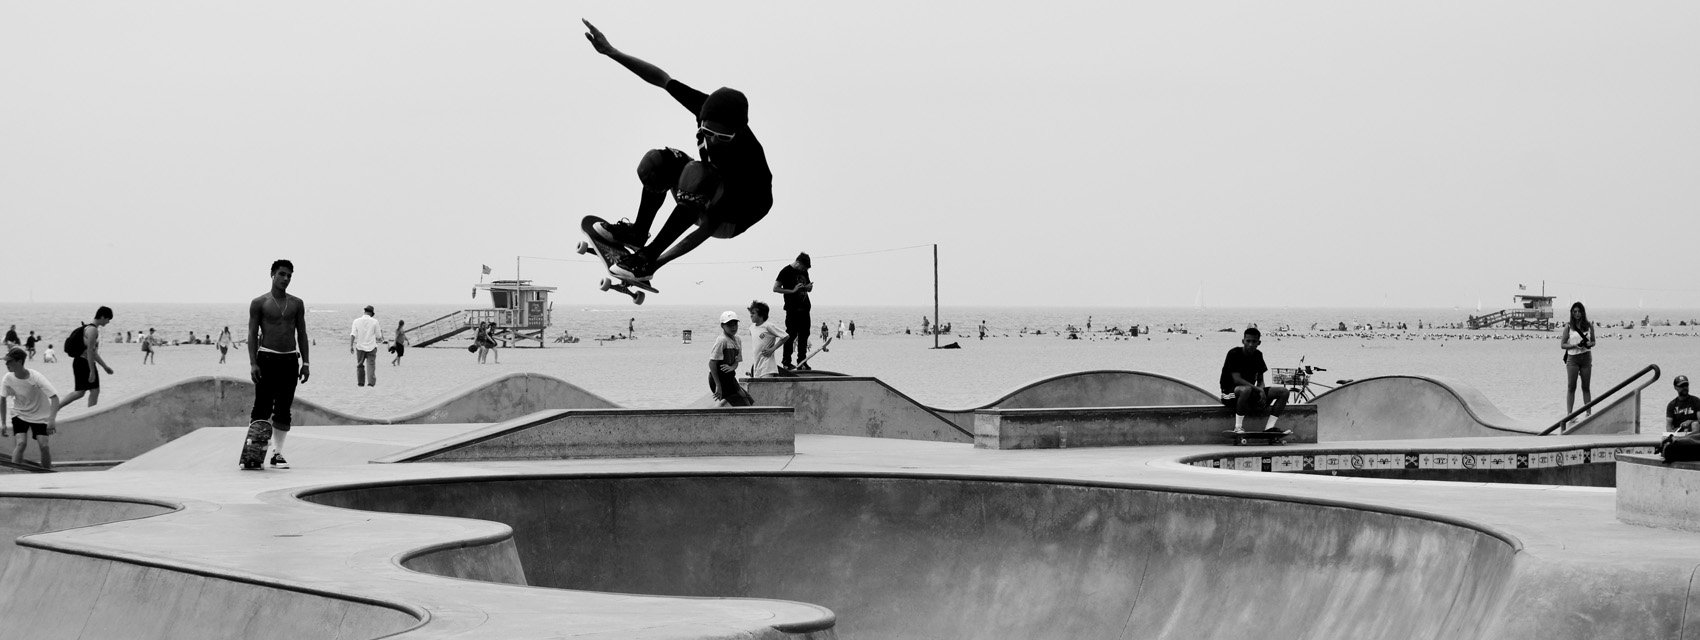 Everything need to know about skateboarding from to Z.